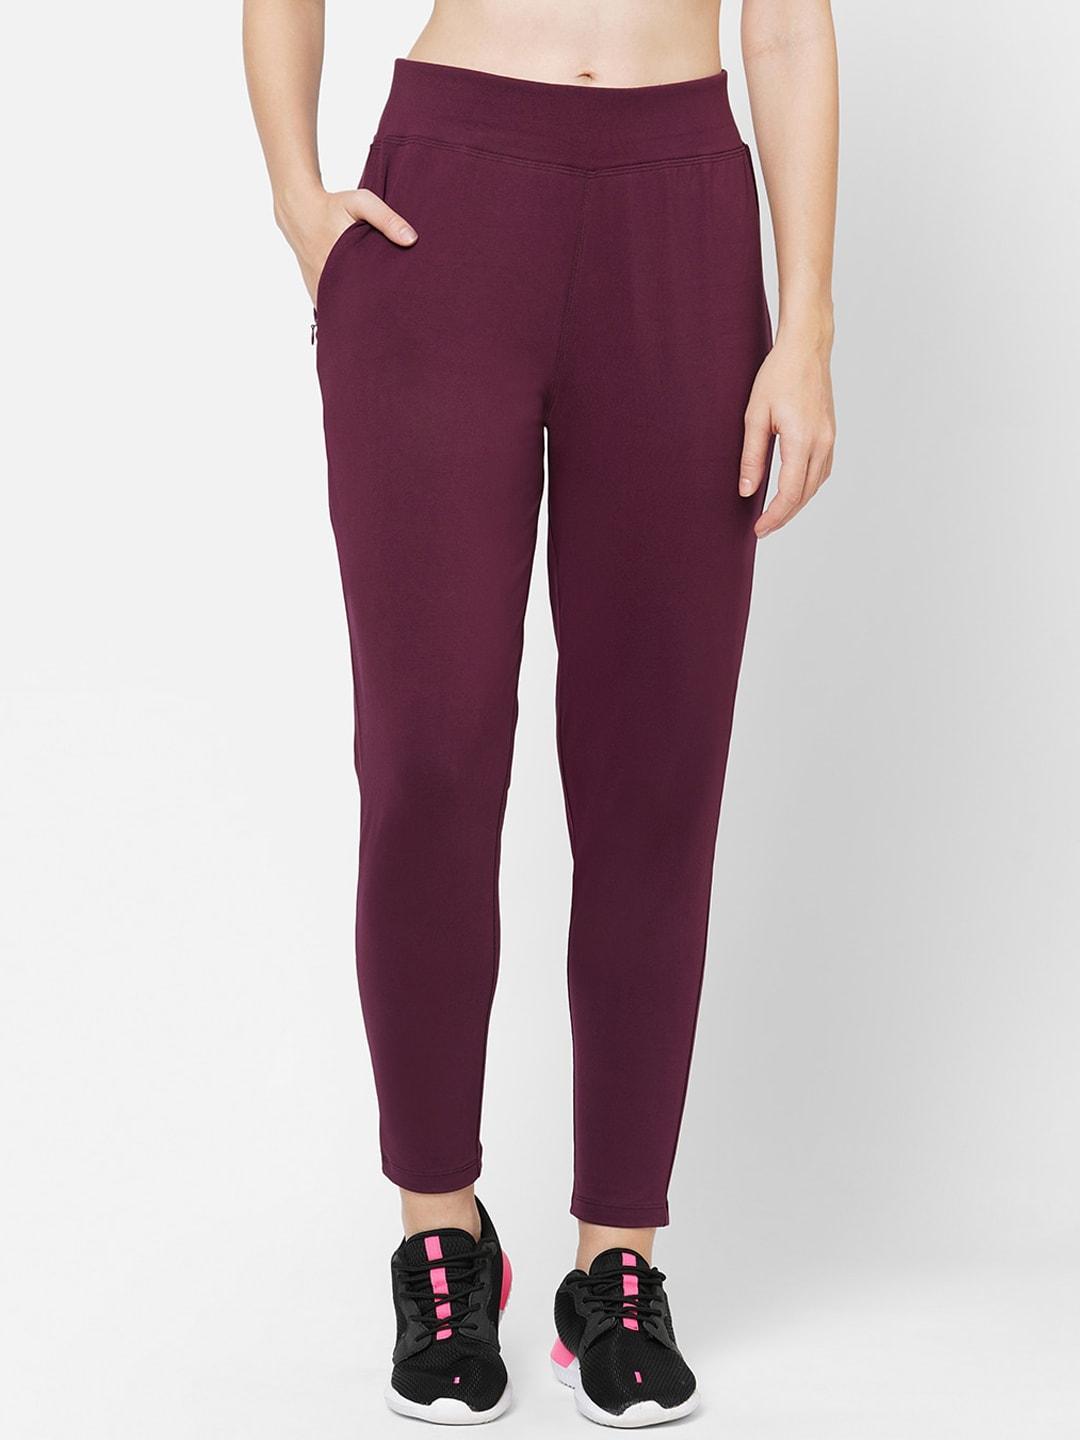 maysixty women maroon solid slim-fit cotton track pants